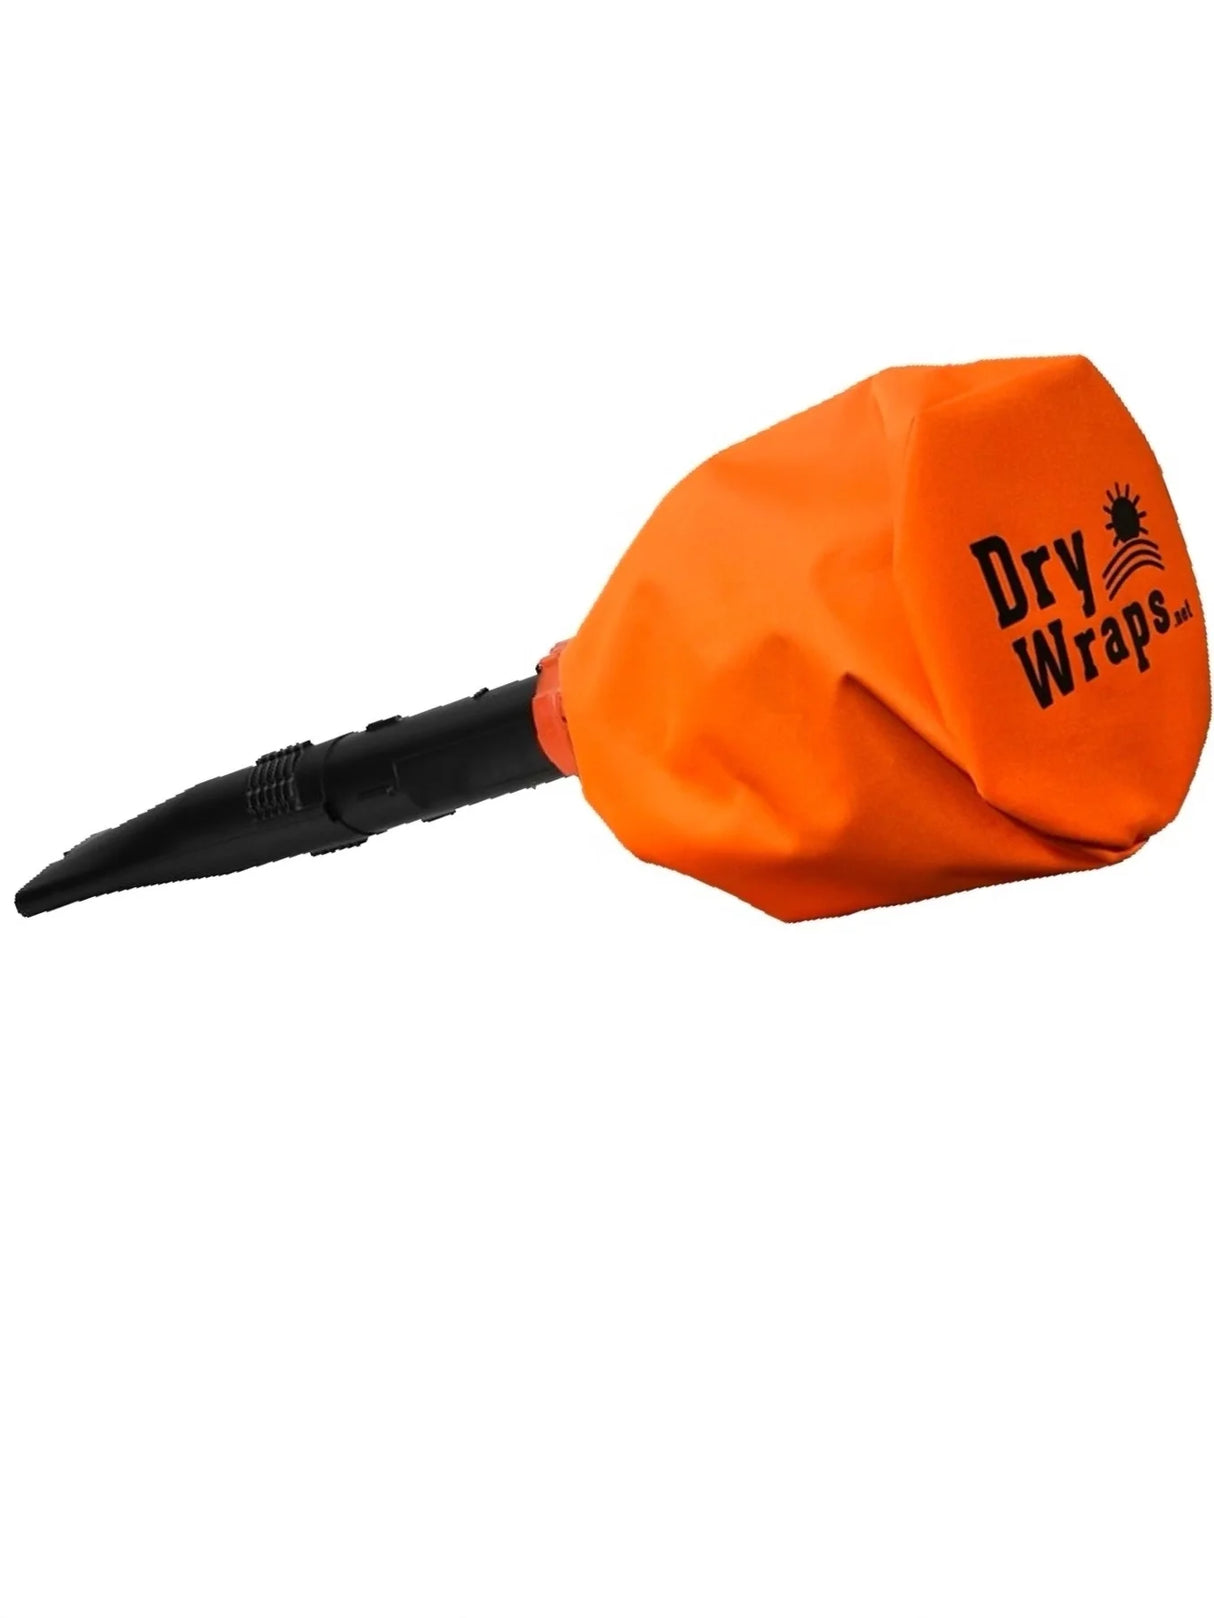 Dry Wraps Handheld Blower Cover